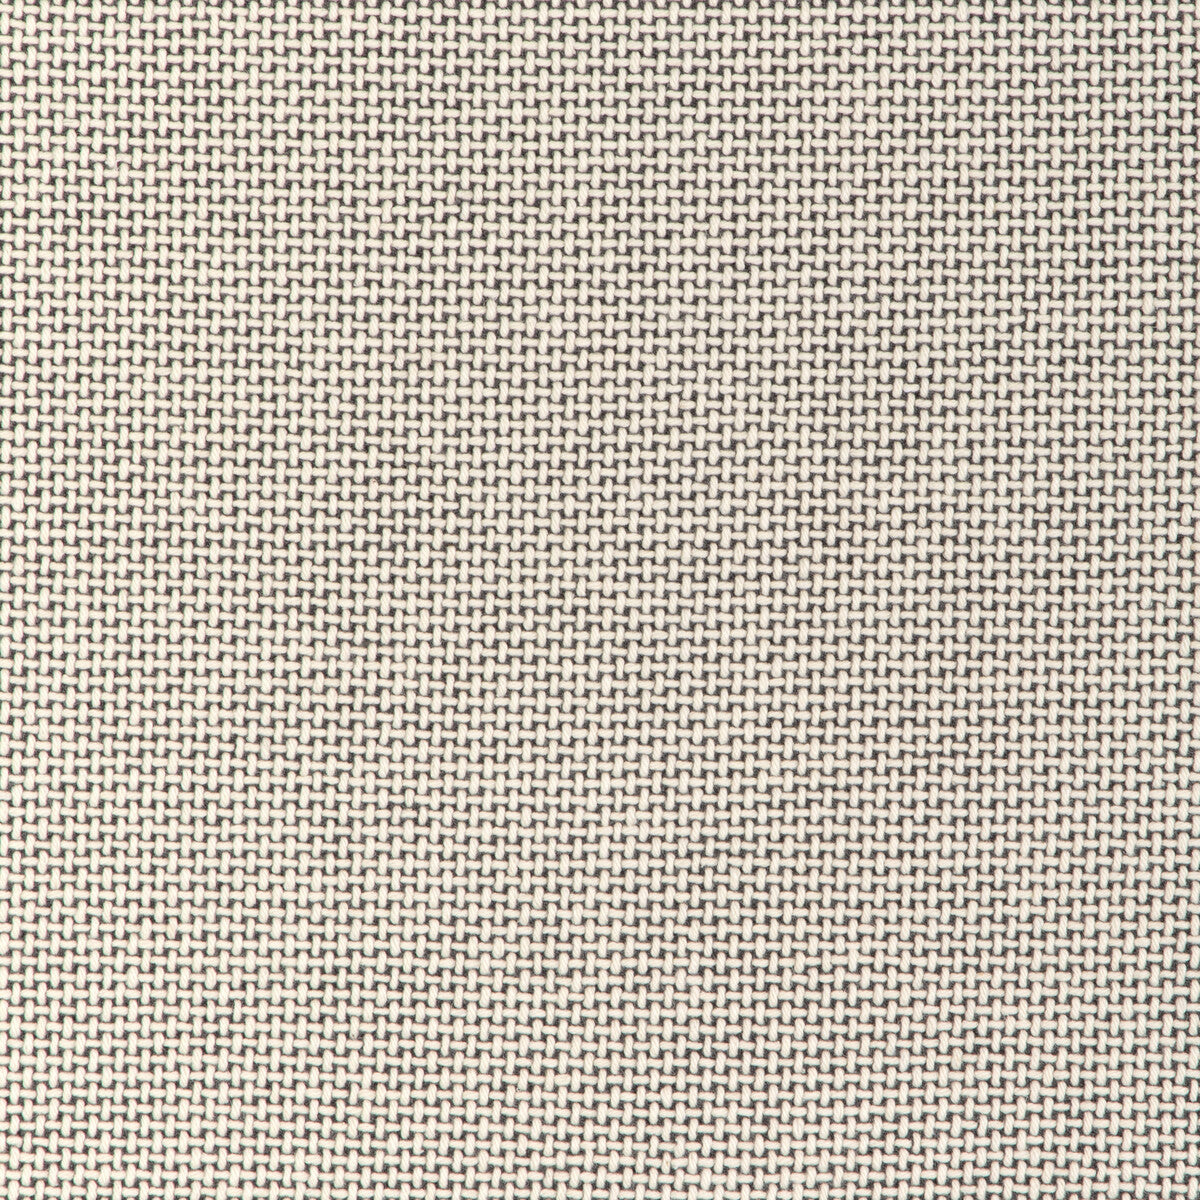 Easton Wool fabric in fossil color - pattern 37027.121.0 - by Kravet Contract